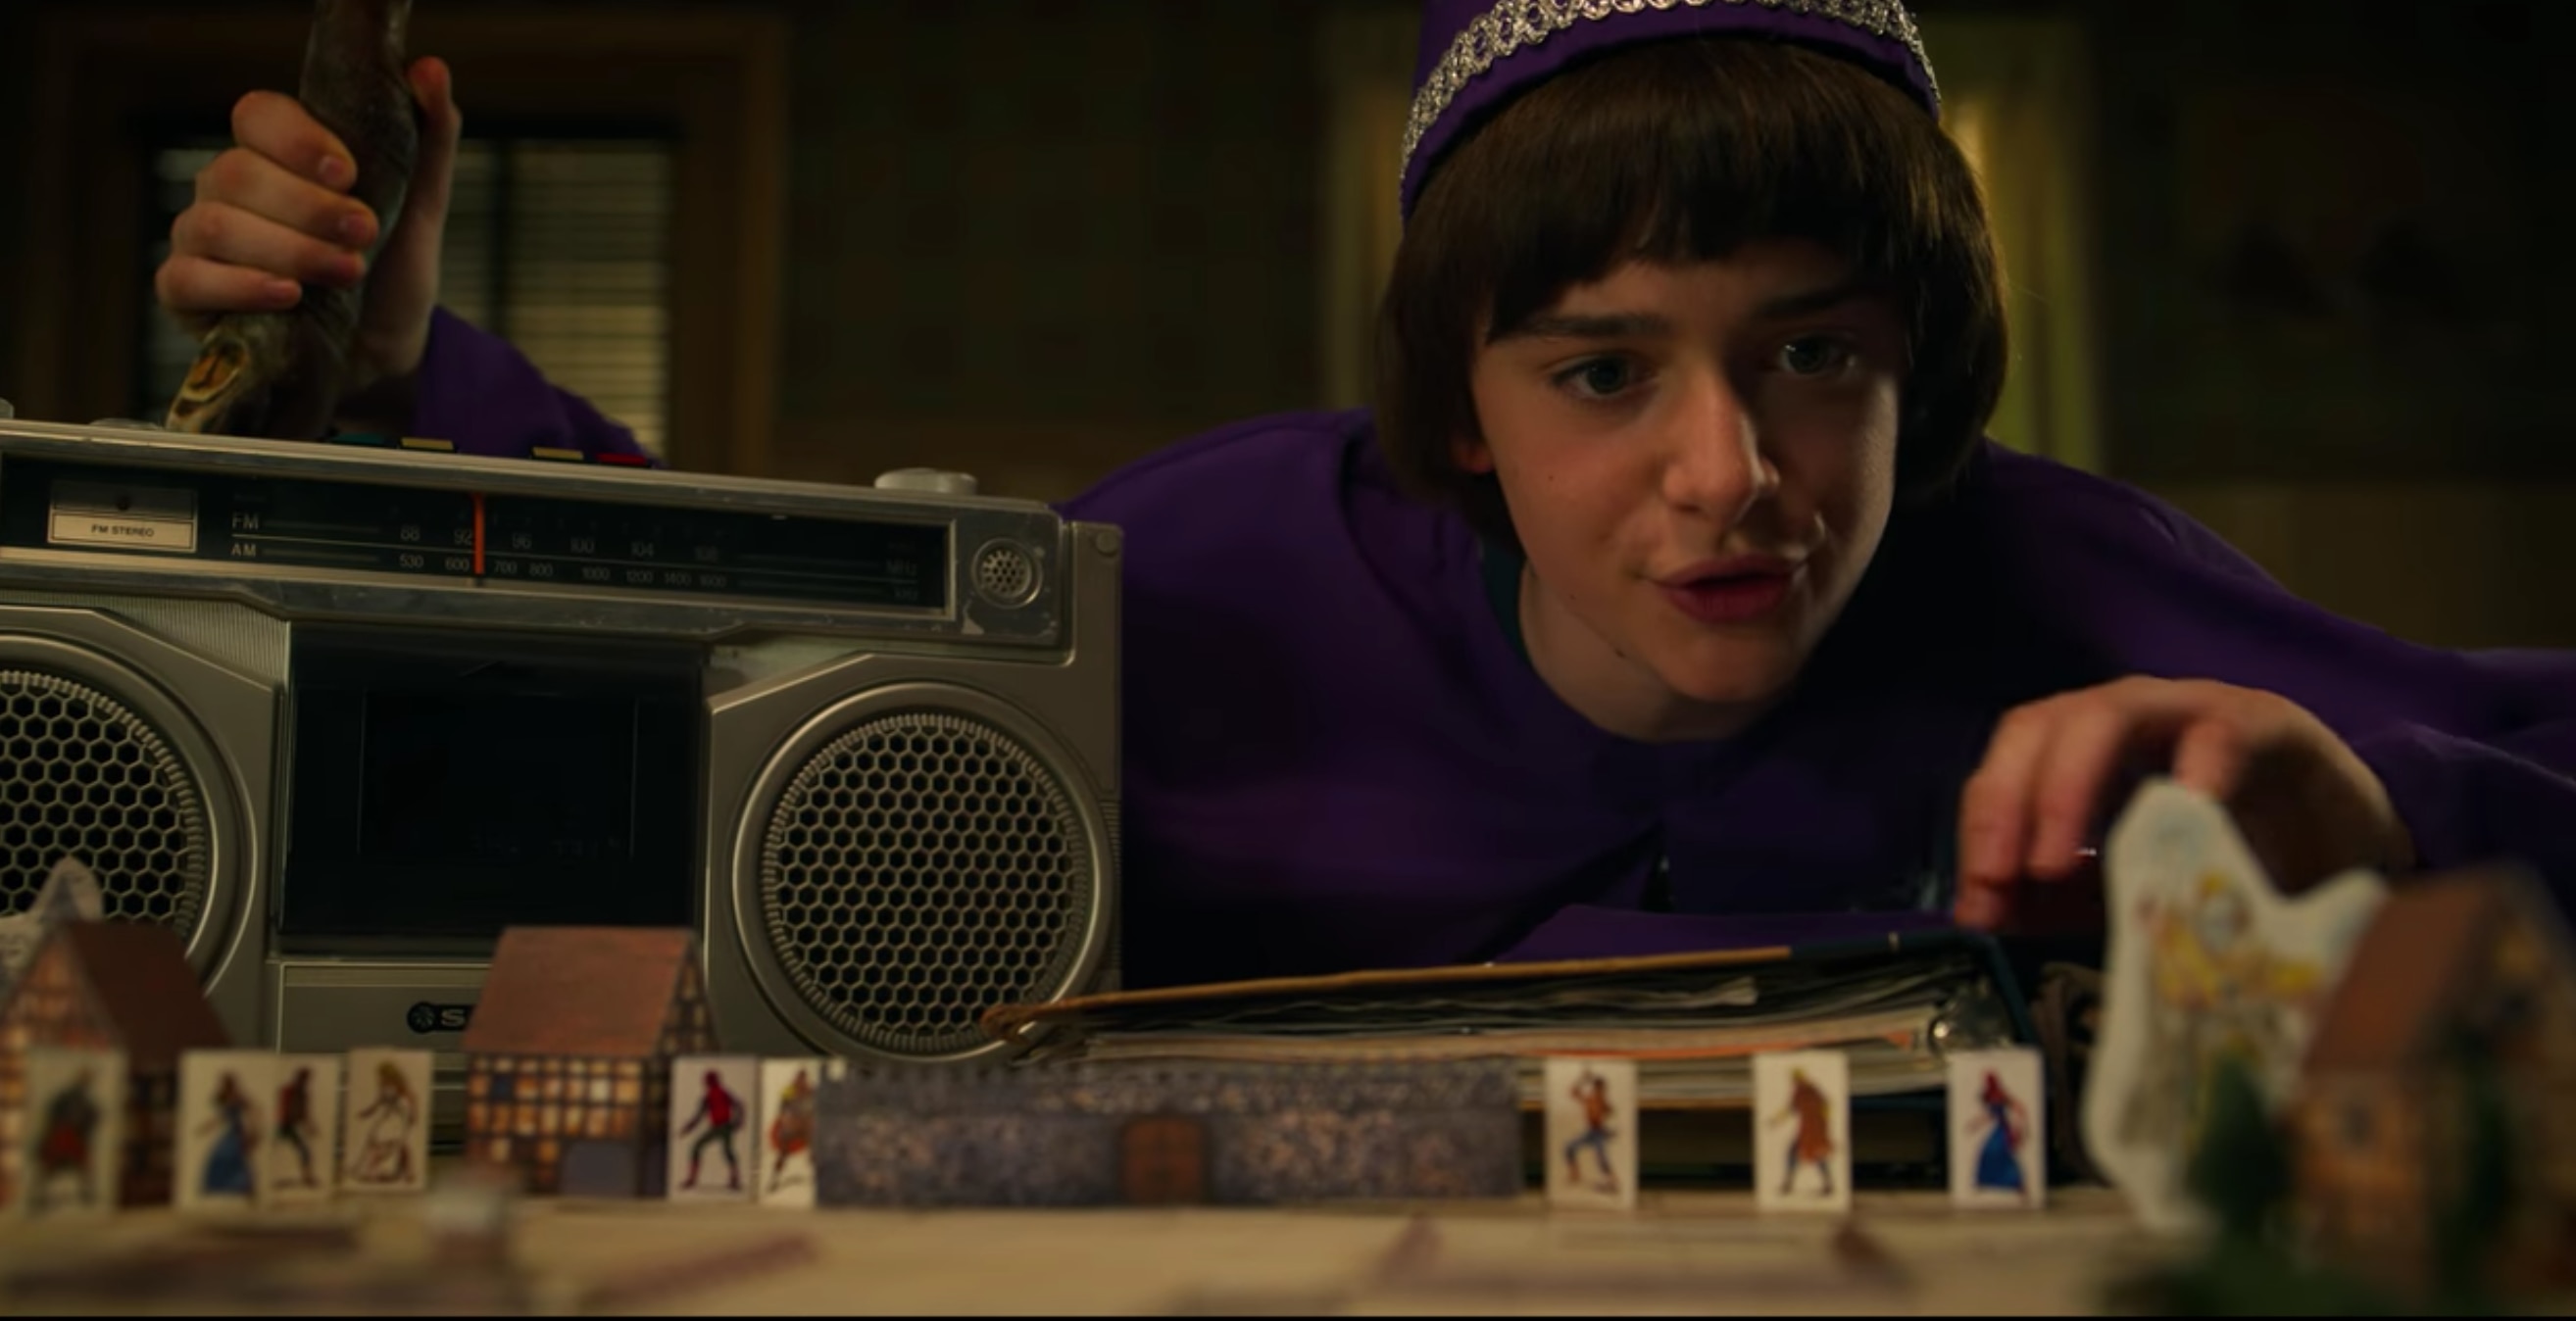 Finn Wolfhard Weighs in on Will's Love for Mike in 'Stranger Things